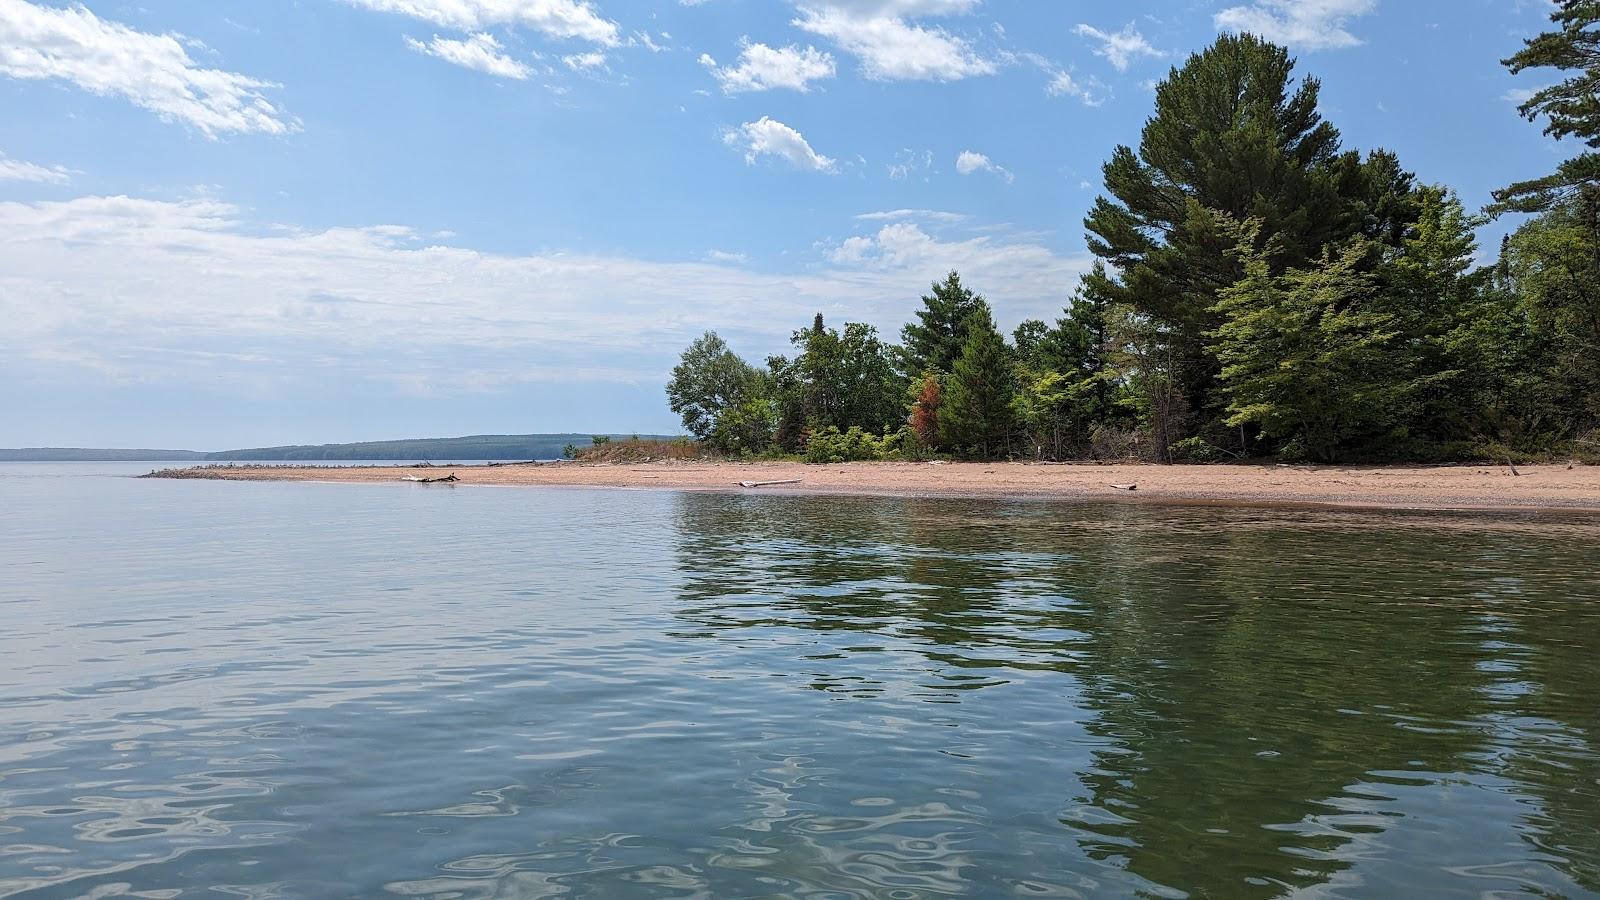 Sandee Apostle Islands Sandscapes State Natural Area Photo